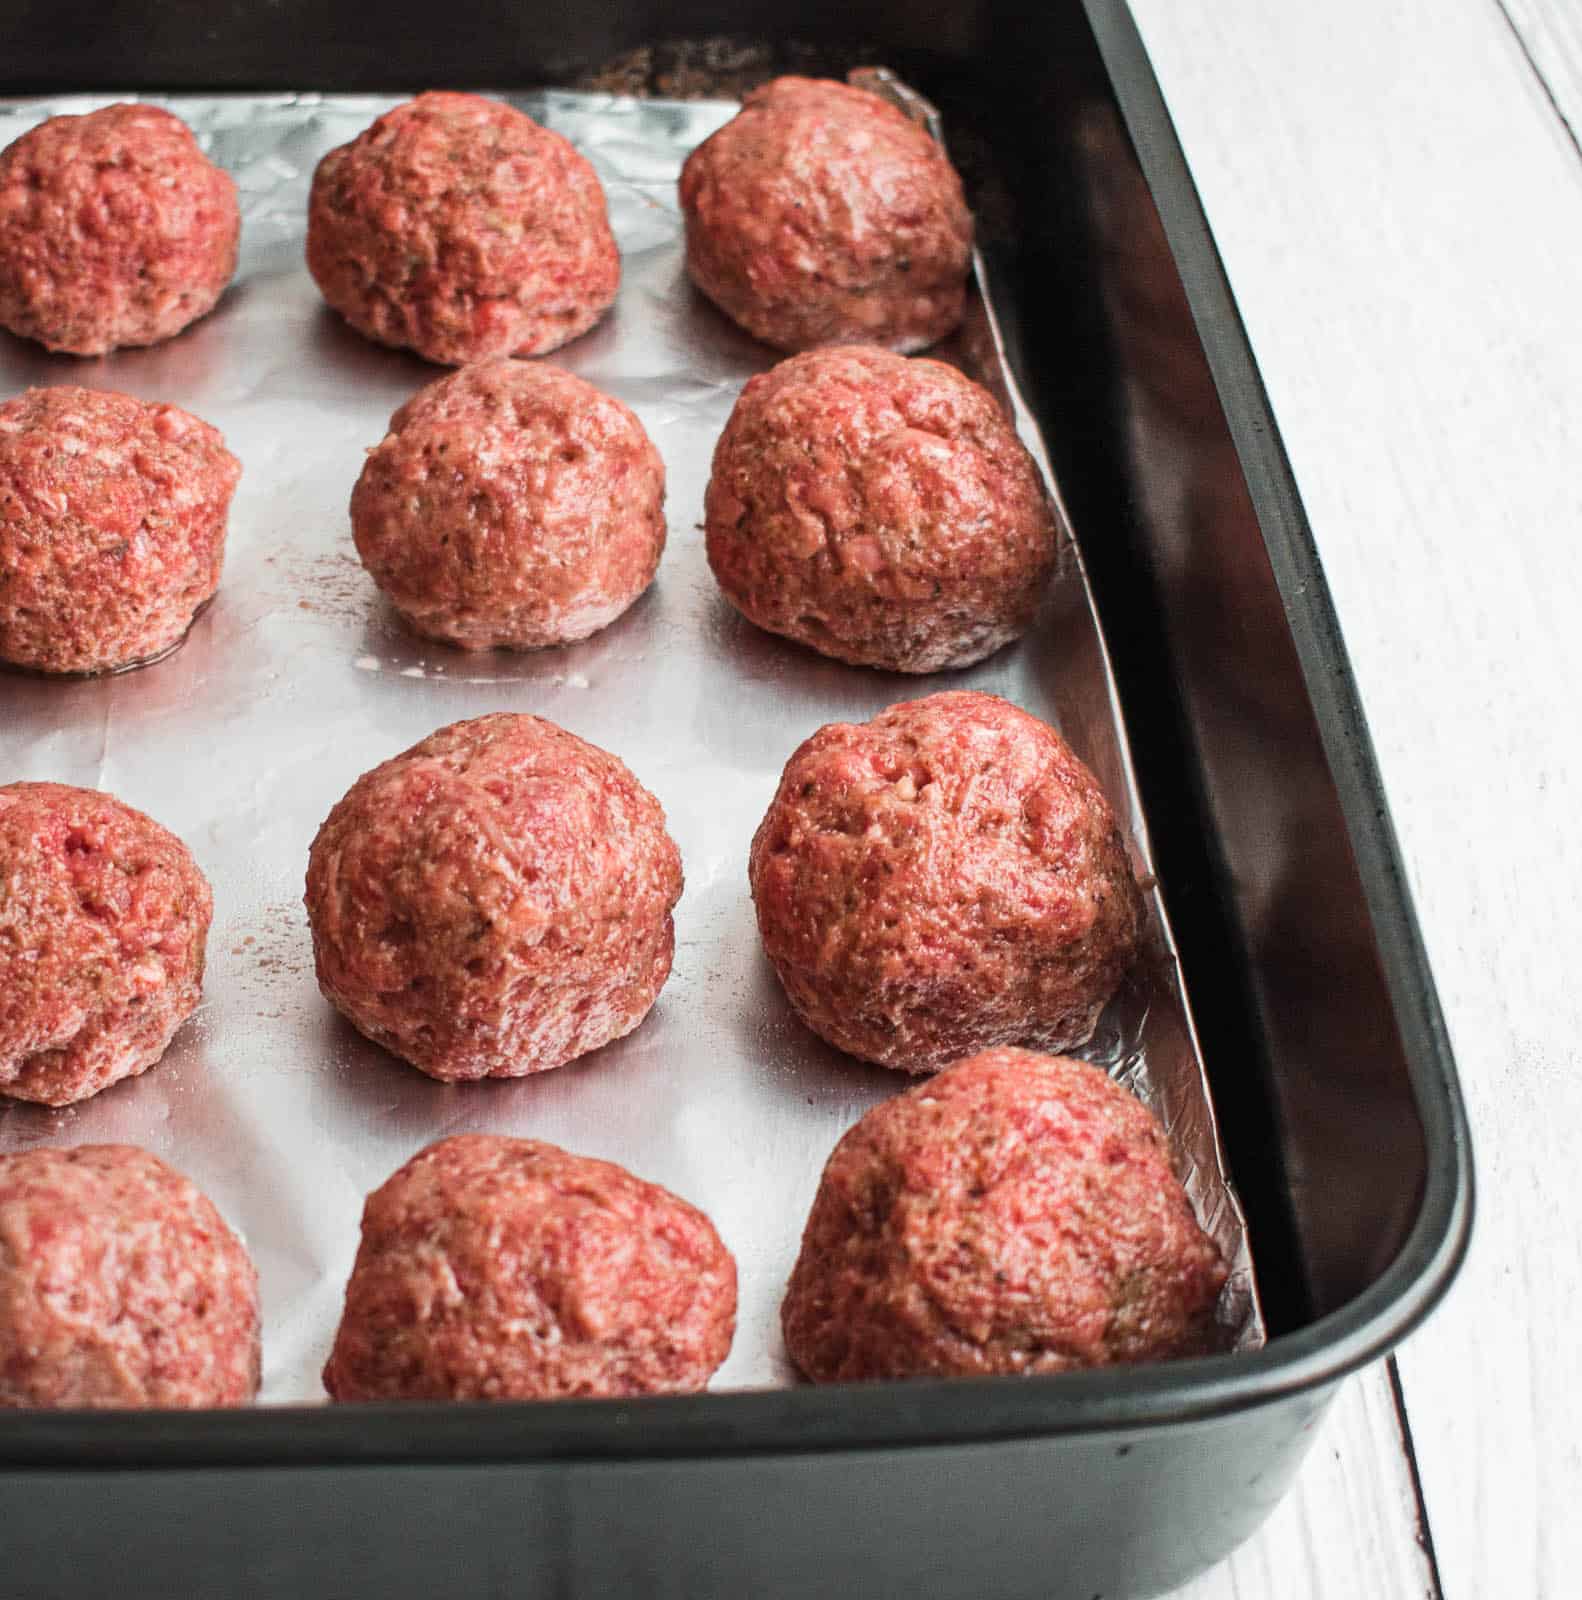 Raw meatballs on a baking sheet about to go into the oven